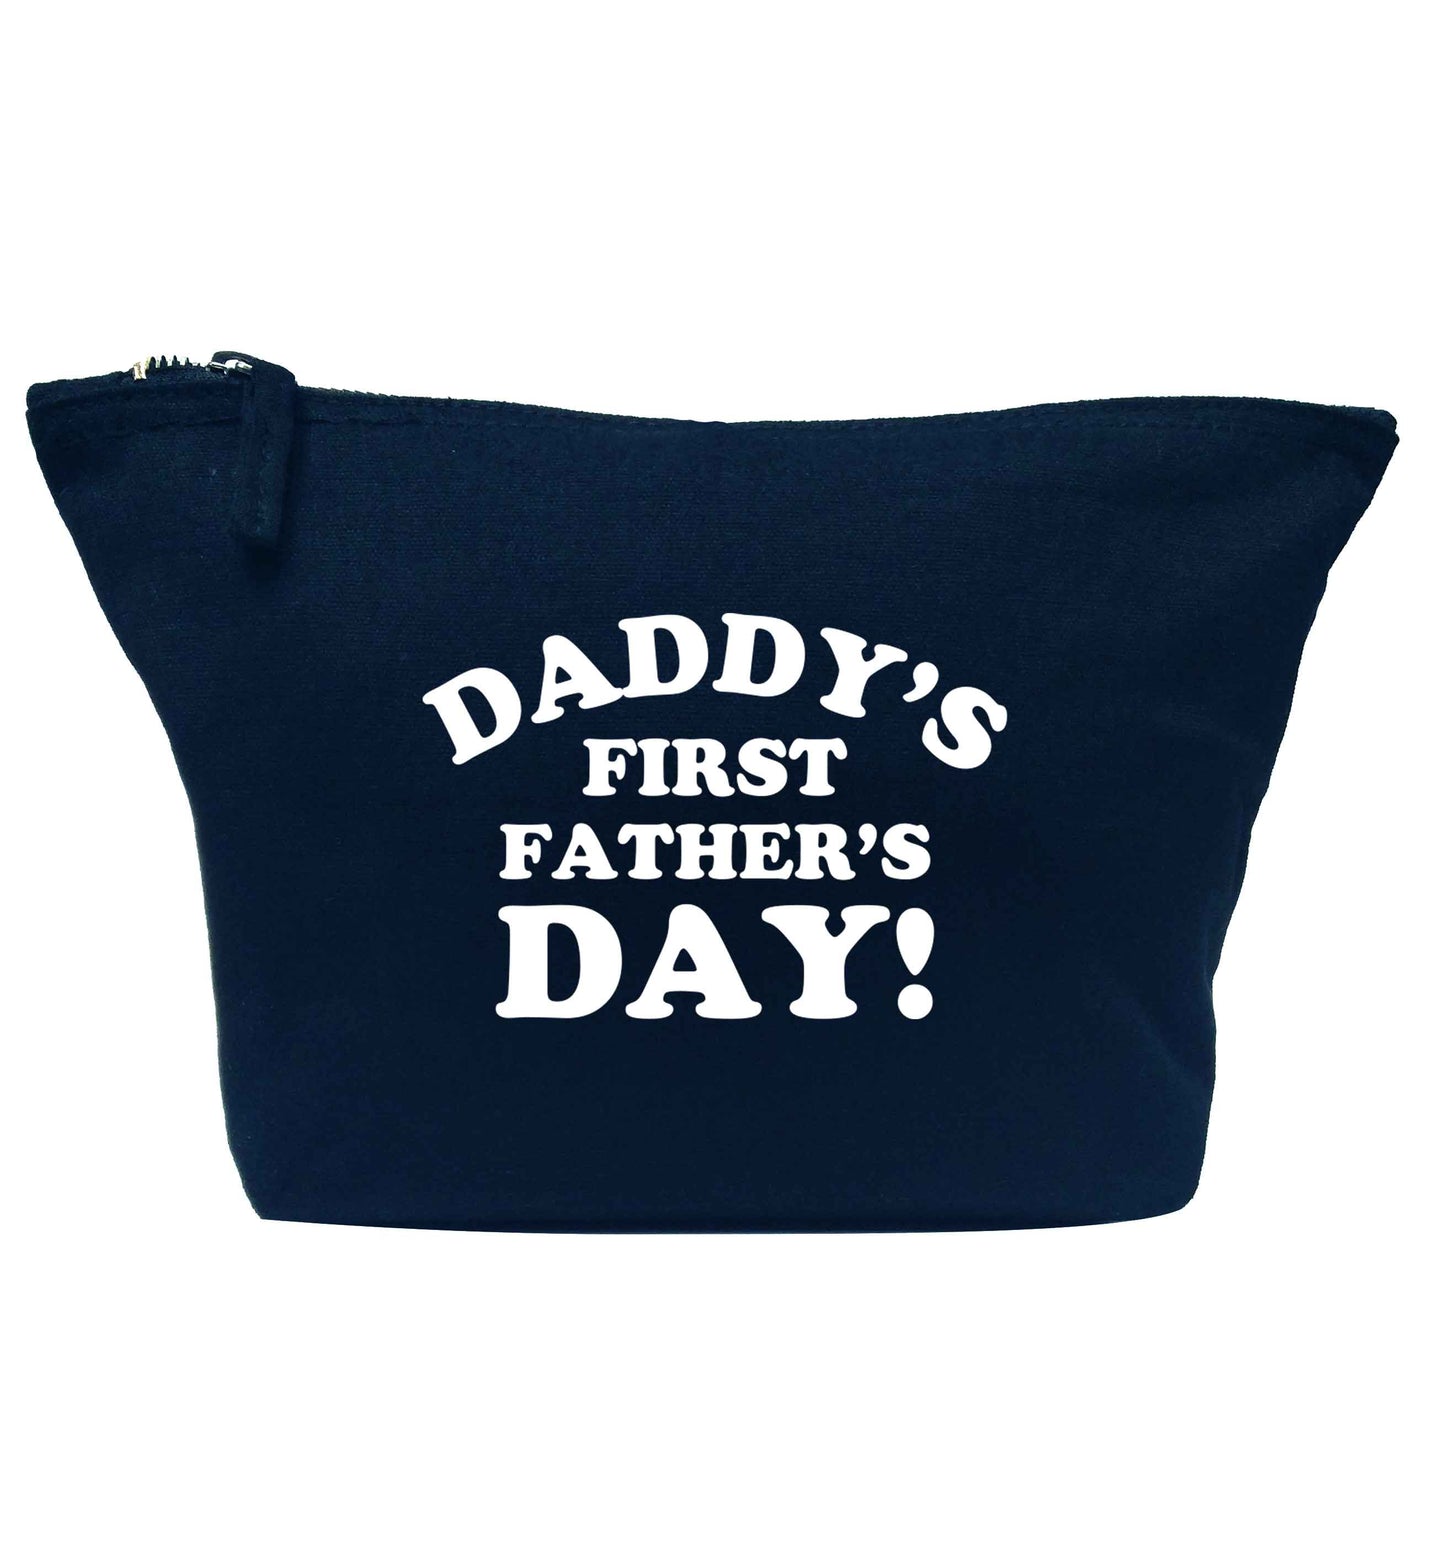 Daddy's first father's day navy makeup bag